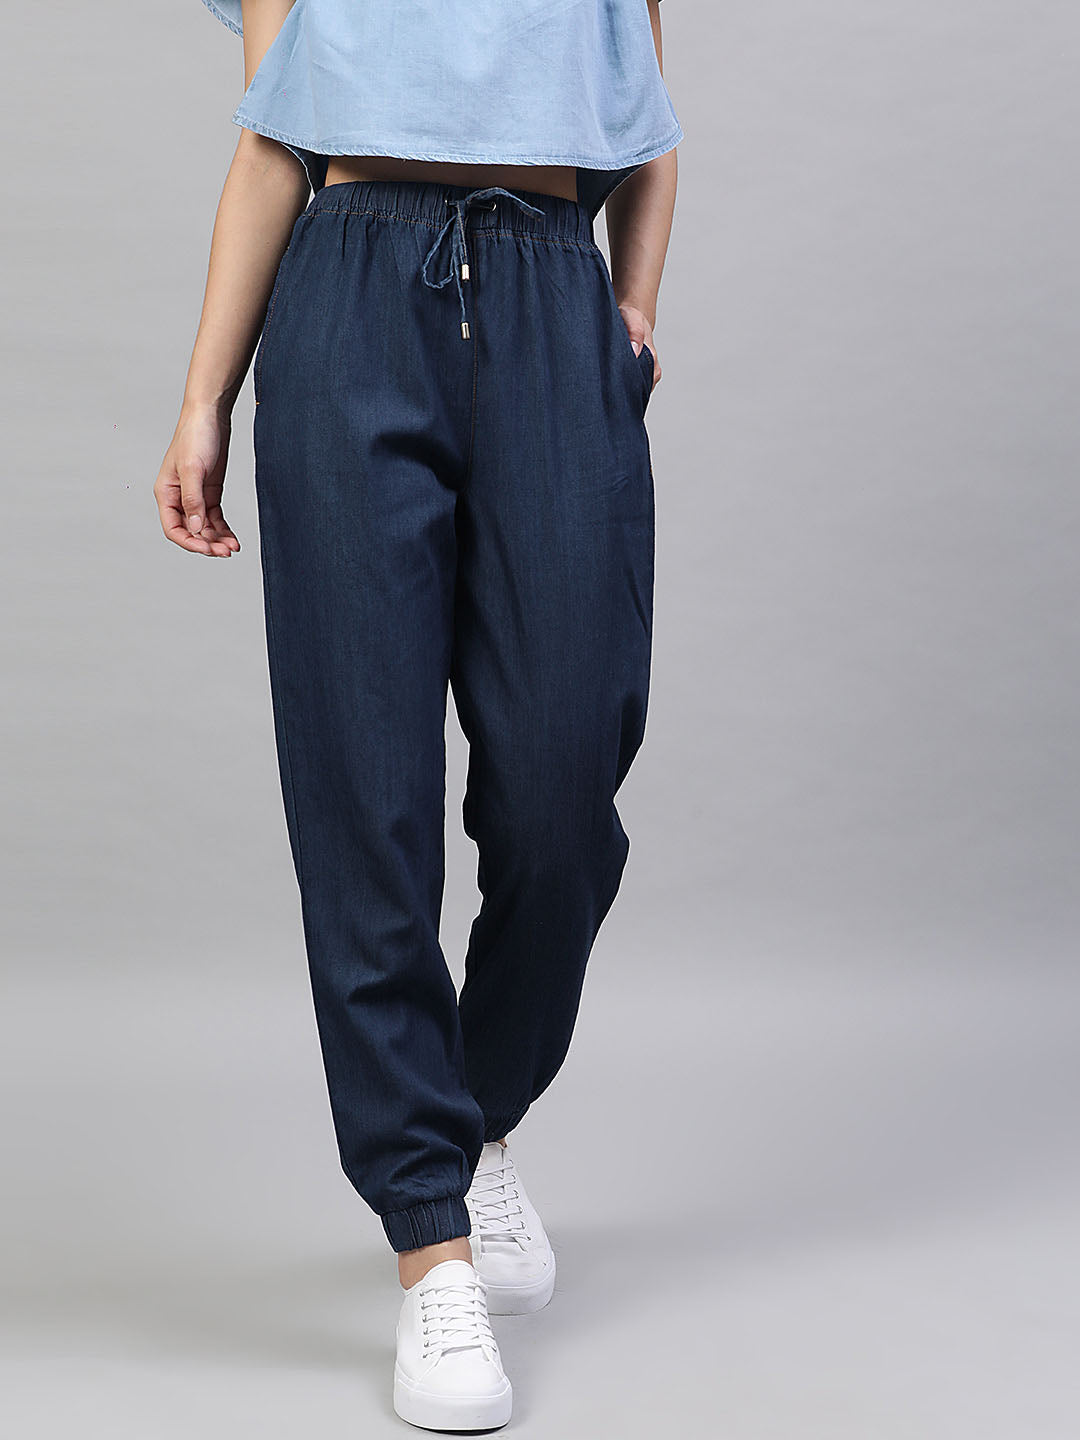 Buy Trend For You Denim Blue Jogger Jeans for Women 30 at Amazonin